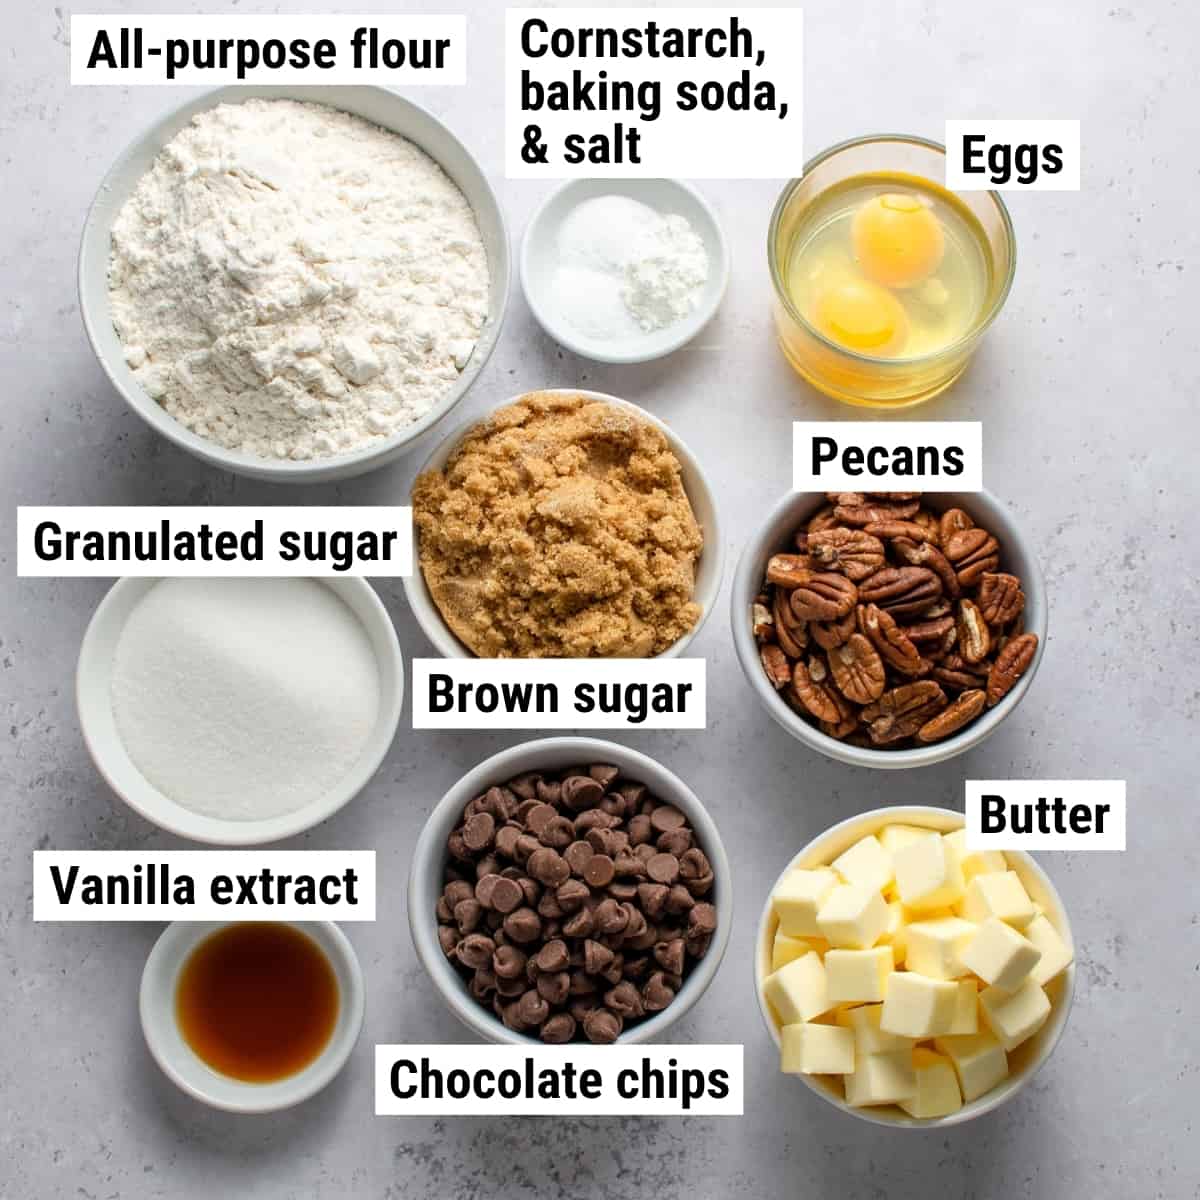 The ingredients used to make chocolate chip pecan cookies spread out on a table.